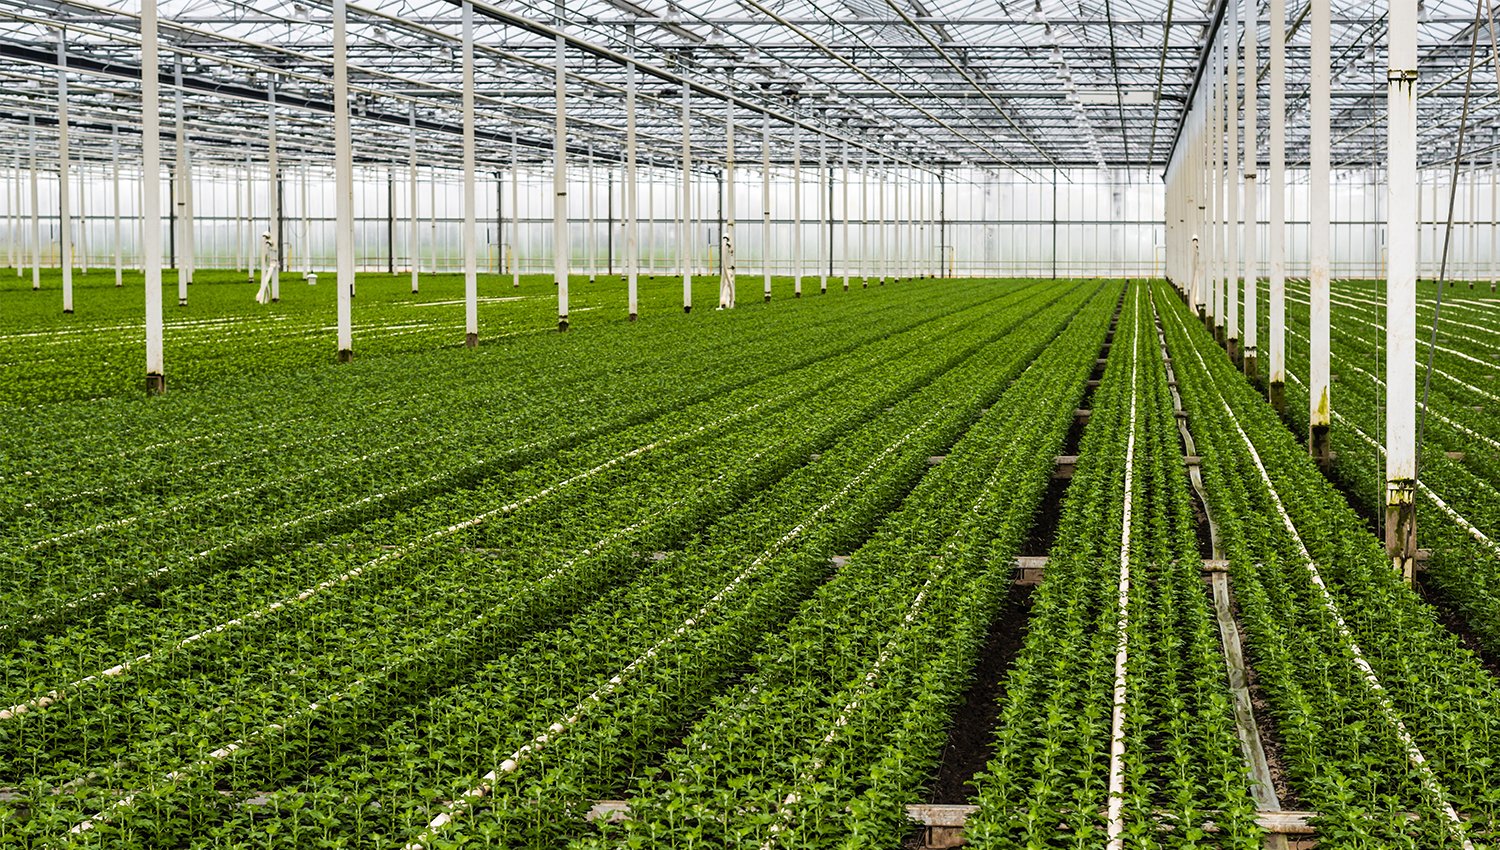 Sustainable greenhouse horticulture